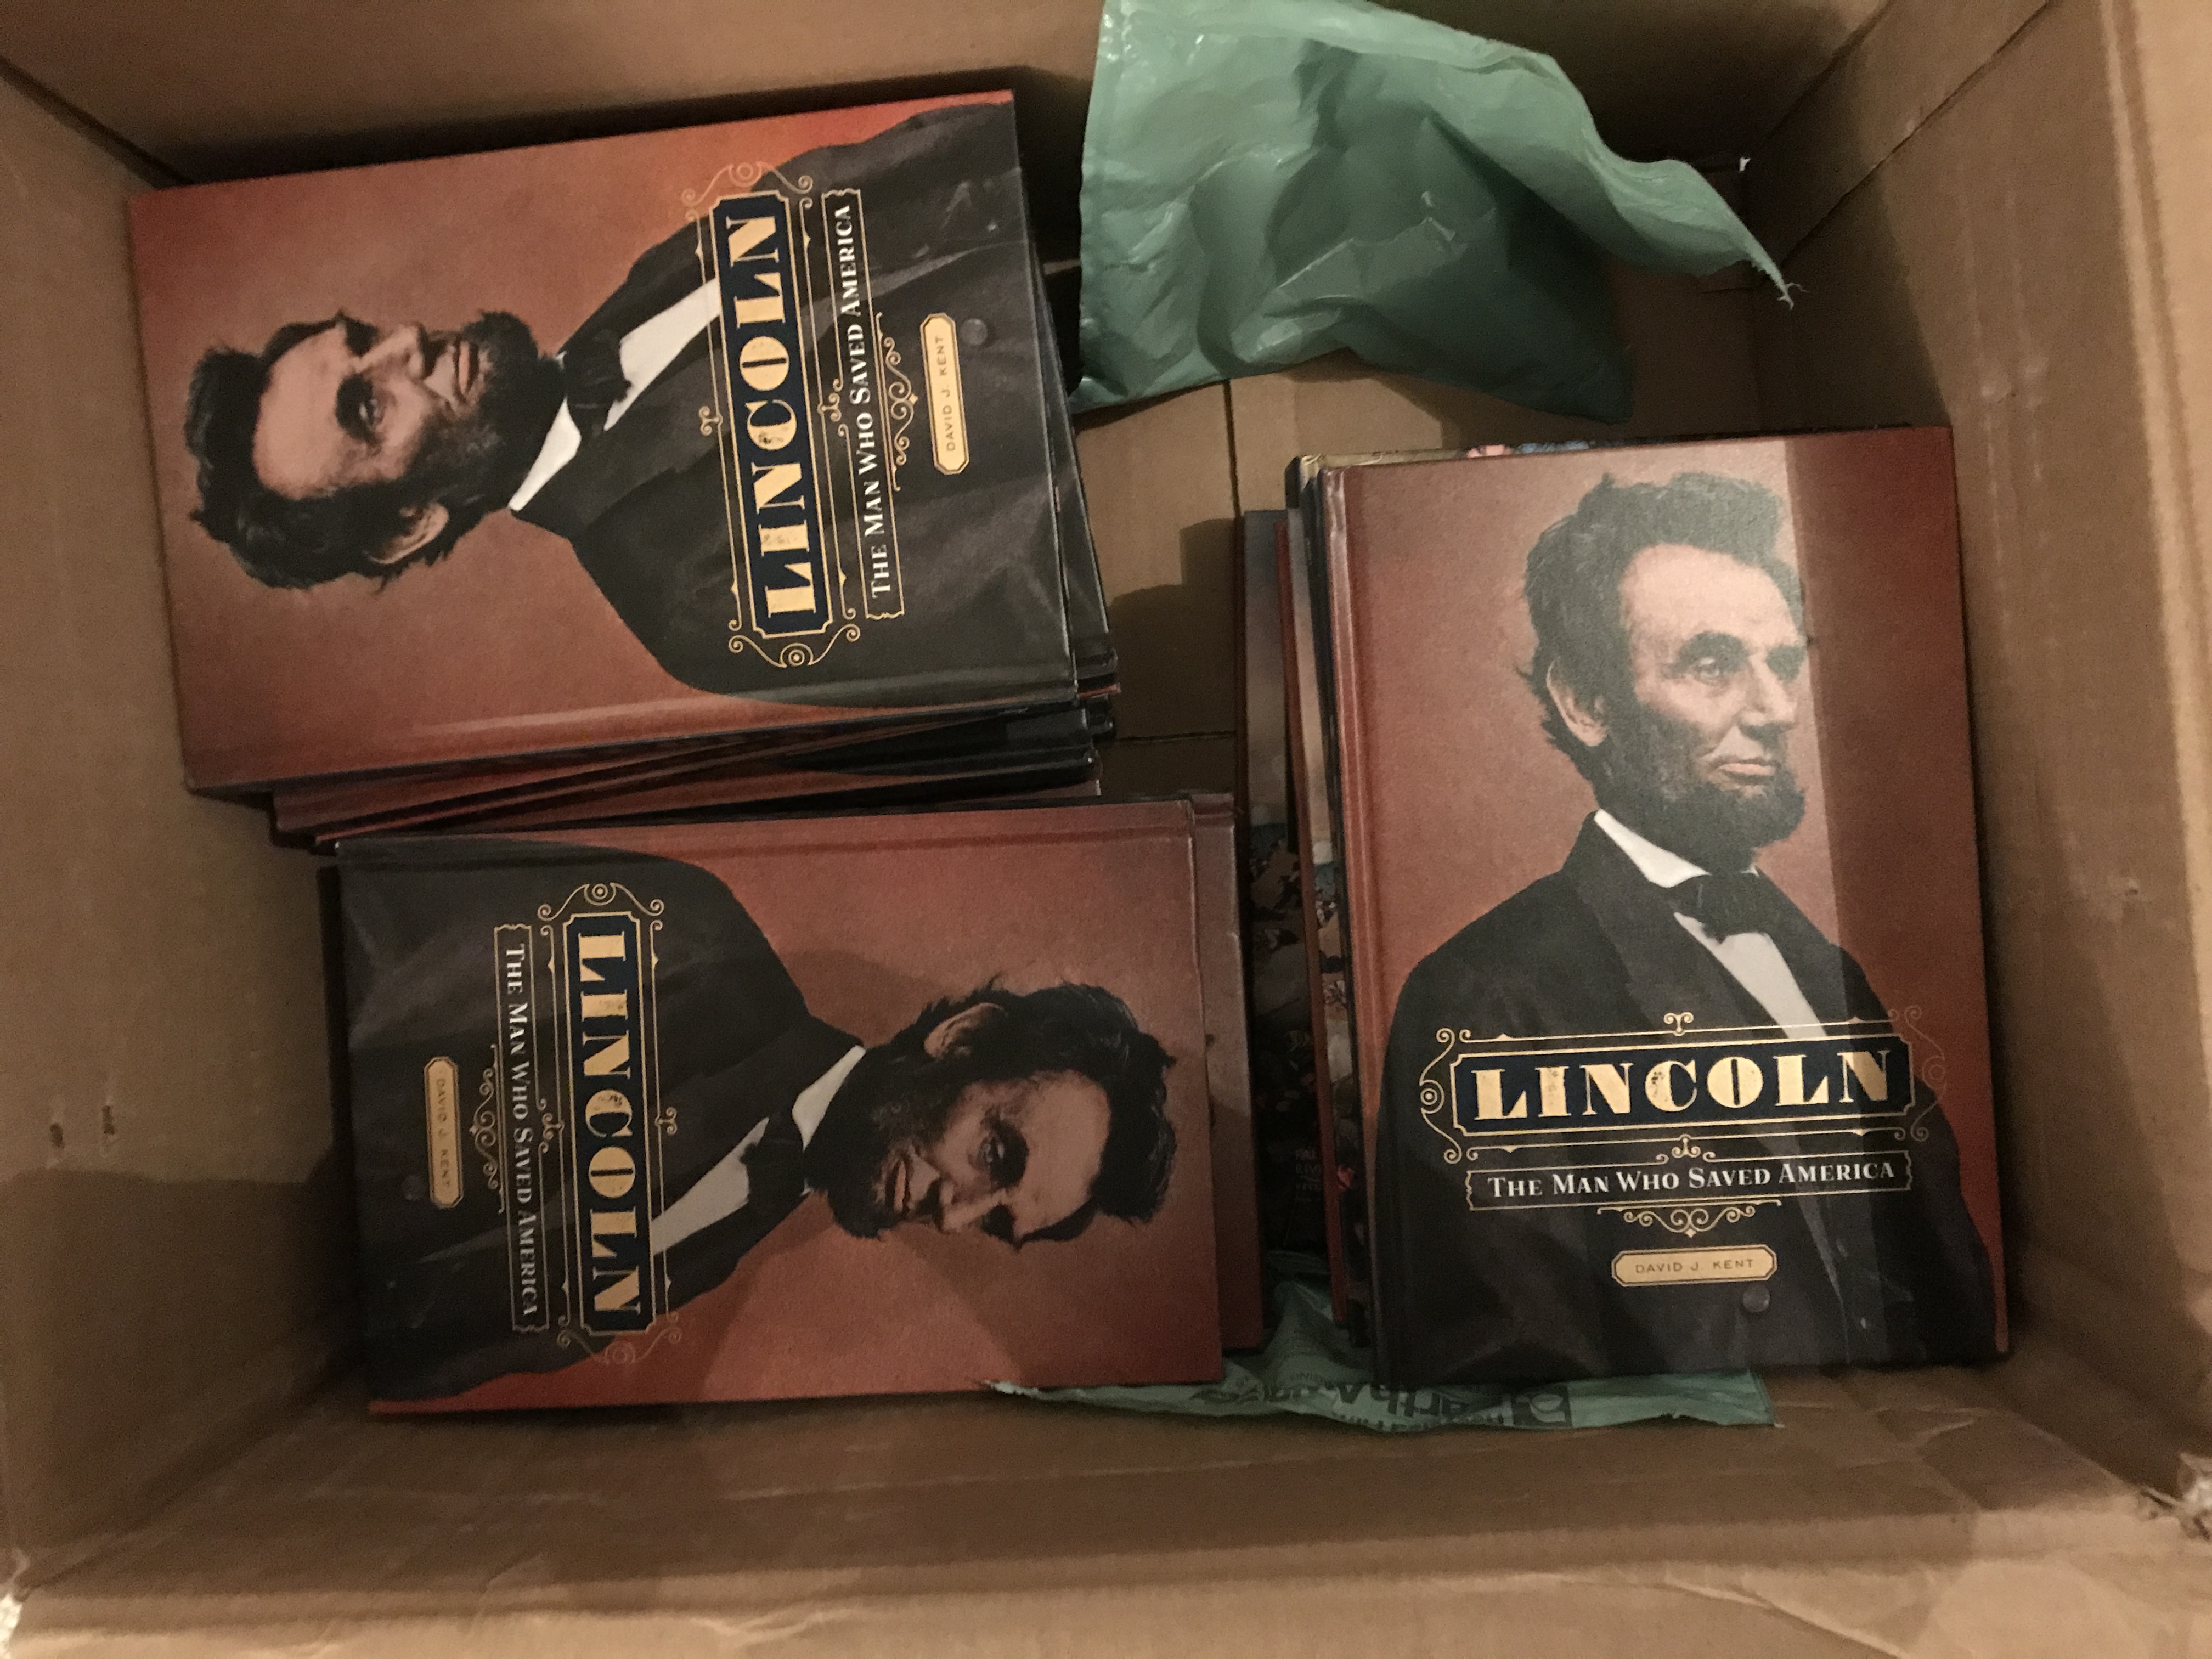 Lincoln: The Man Who Saved America